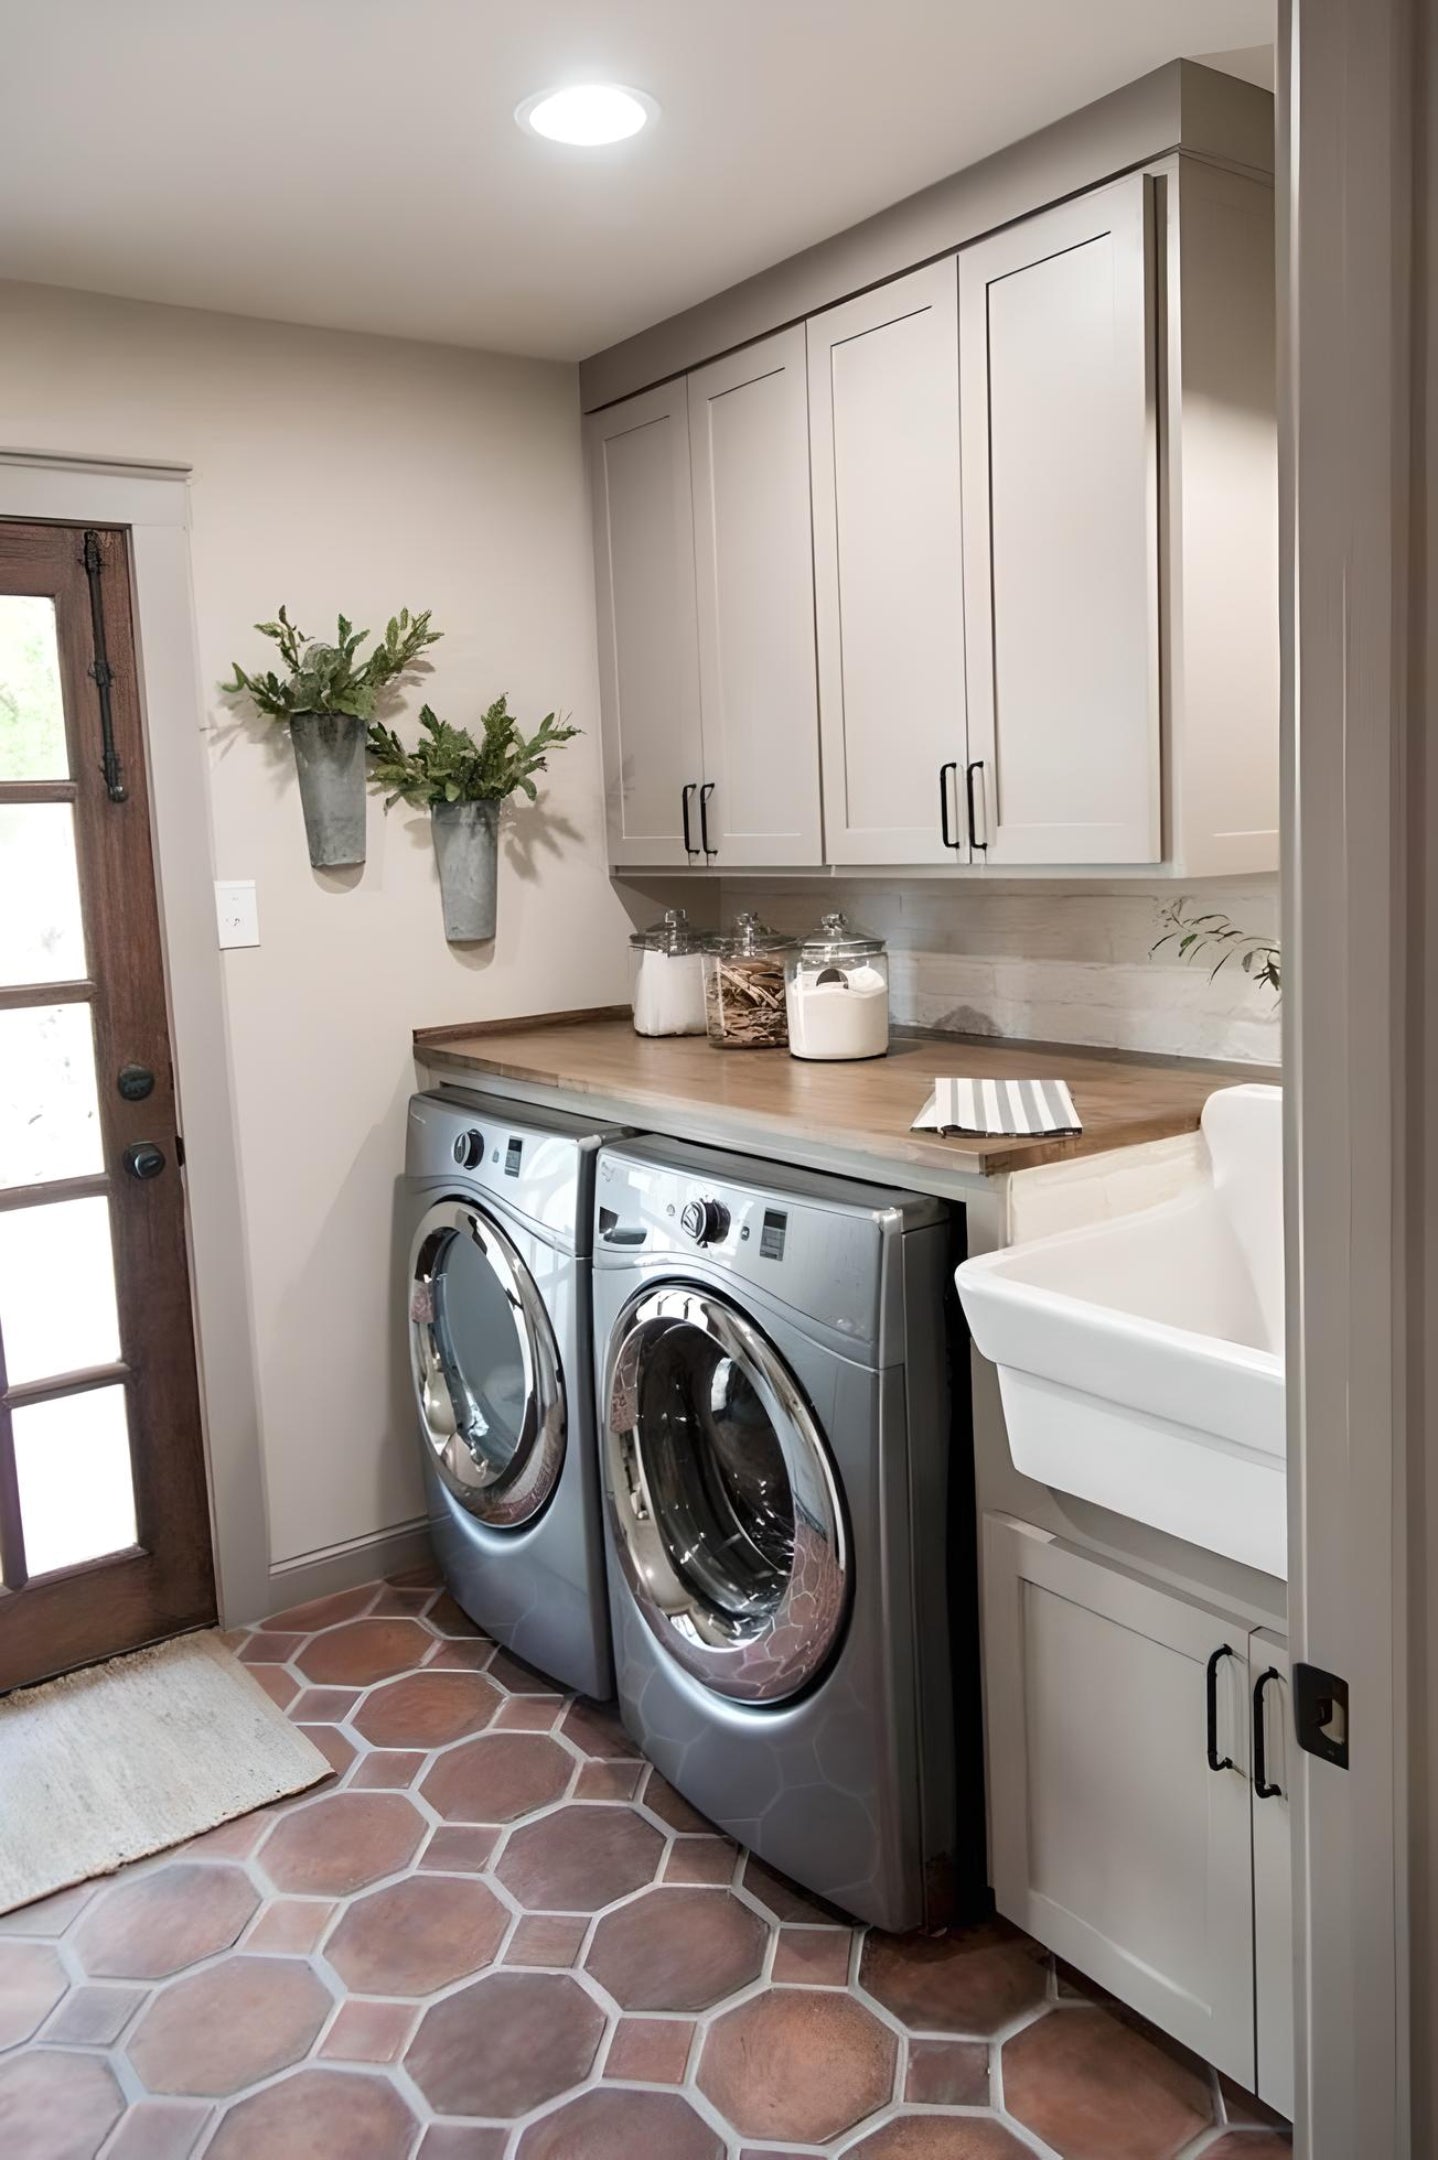 Revitalize Your Laundry Room with L&C Cabinetry: Essential Renovation Tips